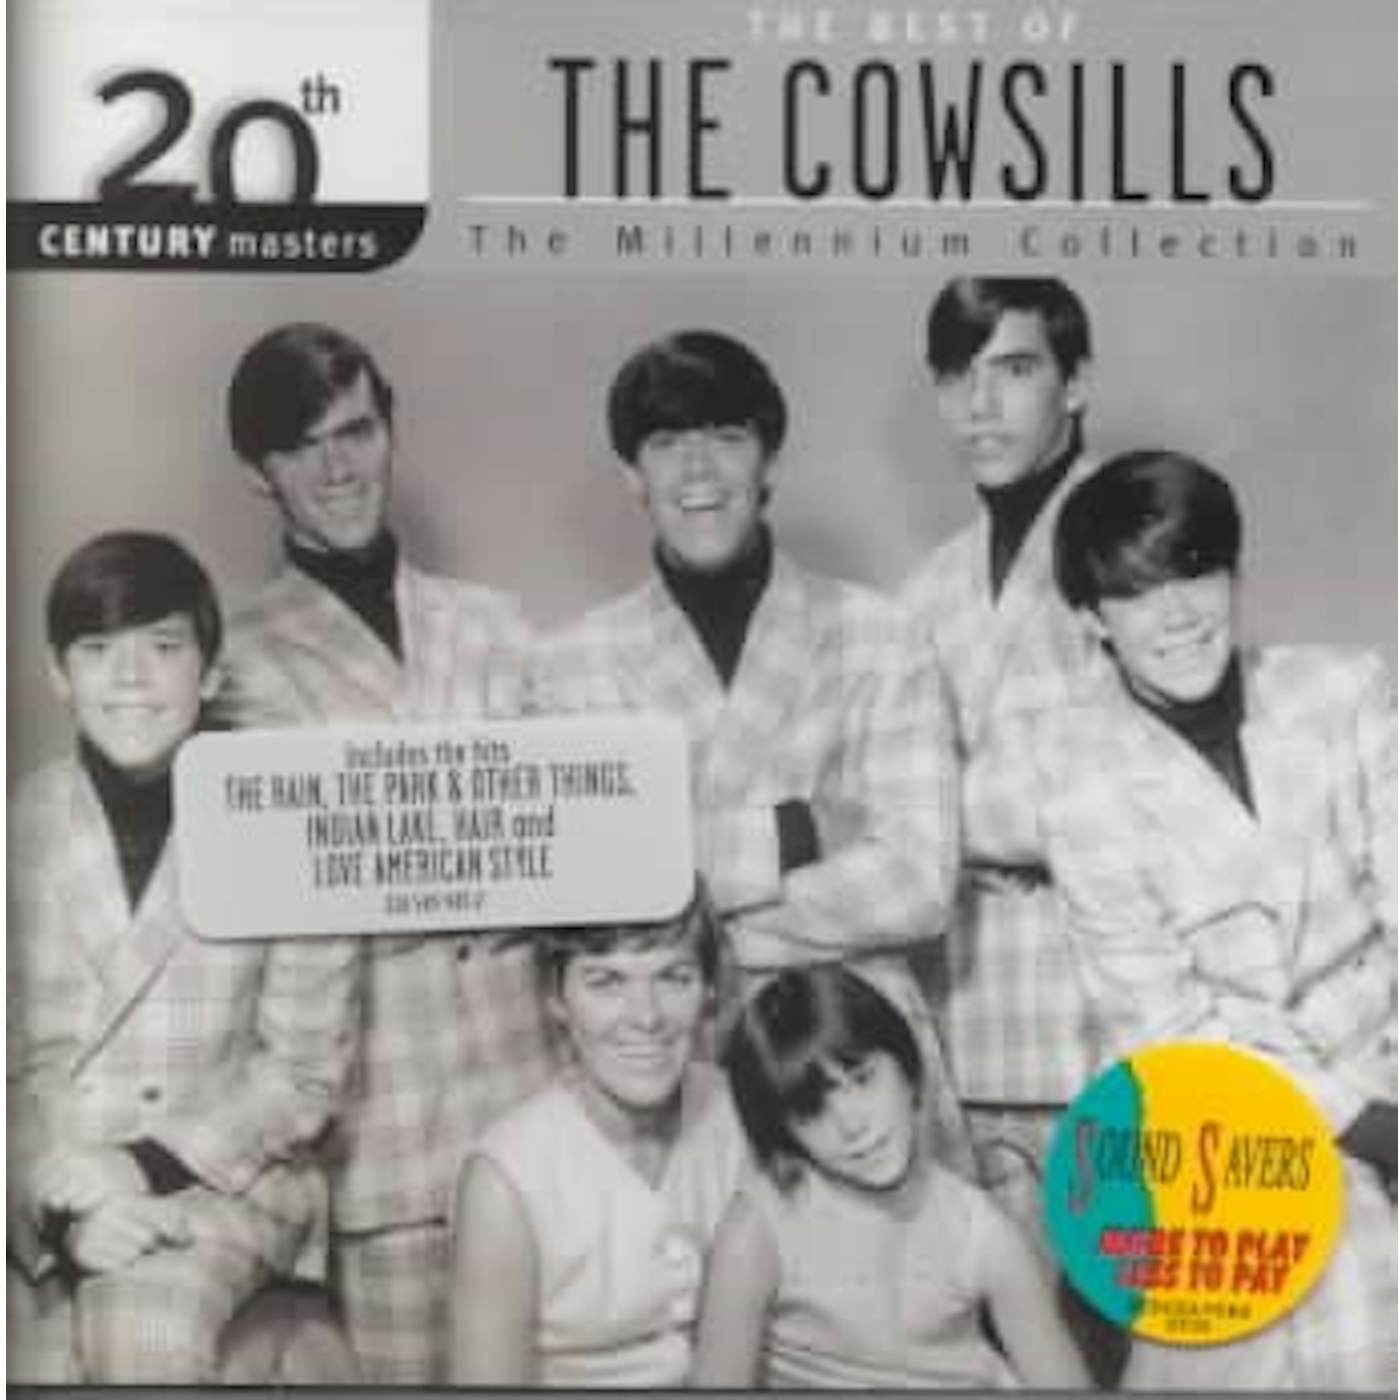 The Cowsills MILLENNIUM COLLECTION: 20TH CENTURY MASTERS CD